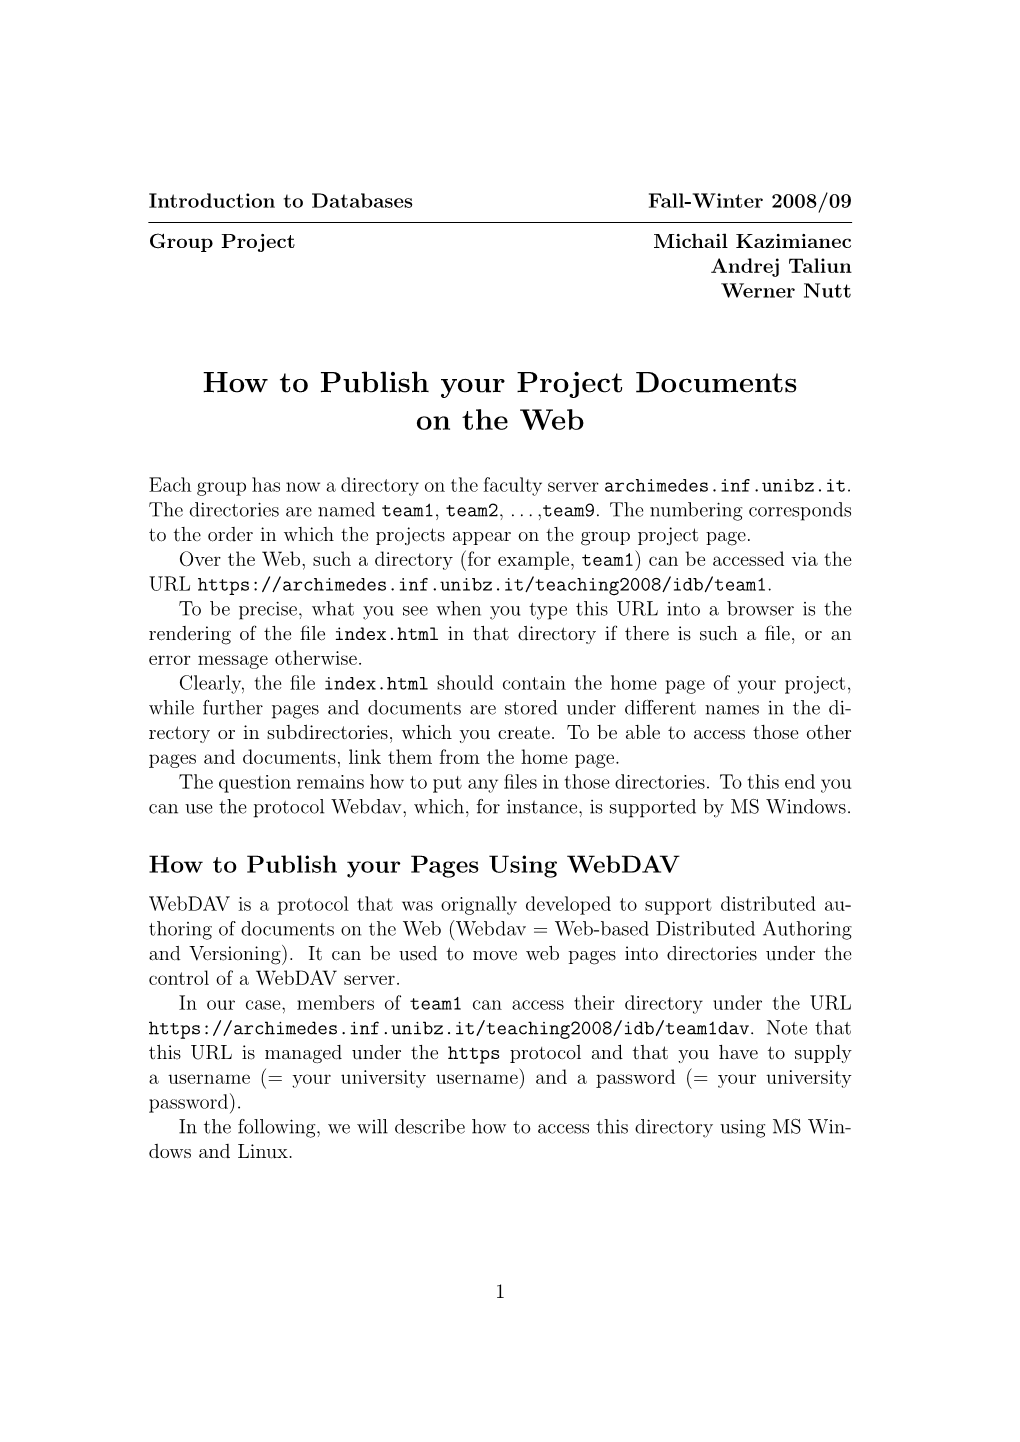 How to Publish Your Project Documents on the Web